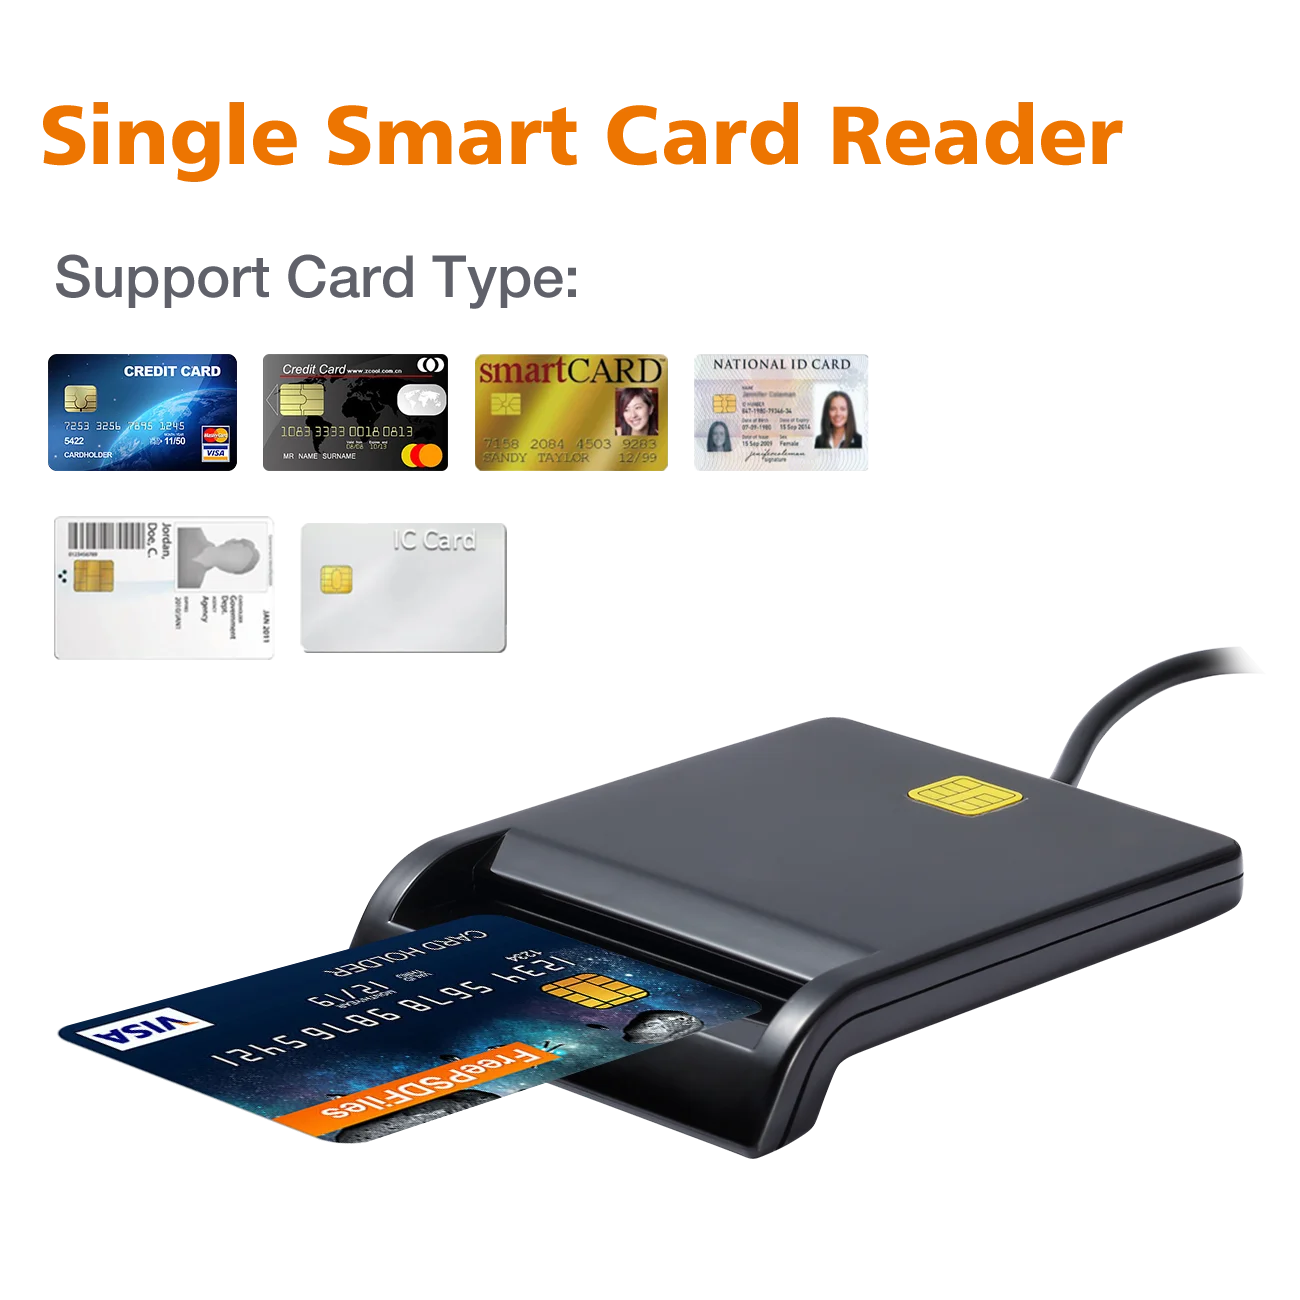 software for emv ic card or chip and pin card reader or writer